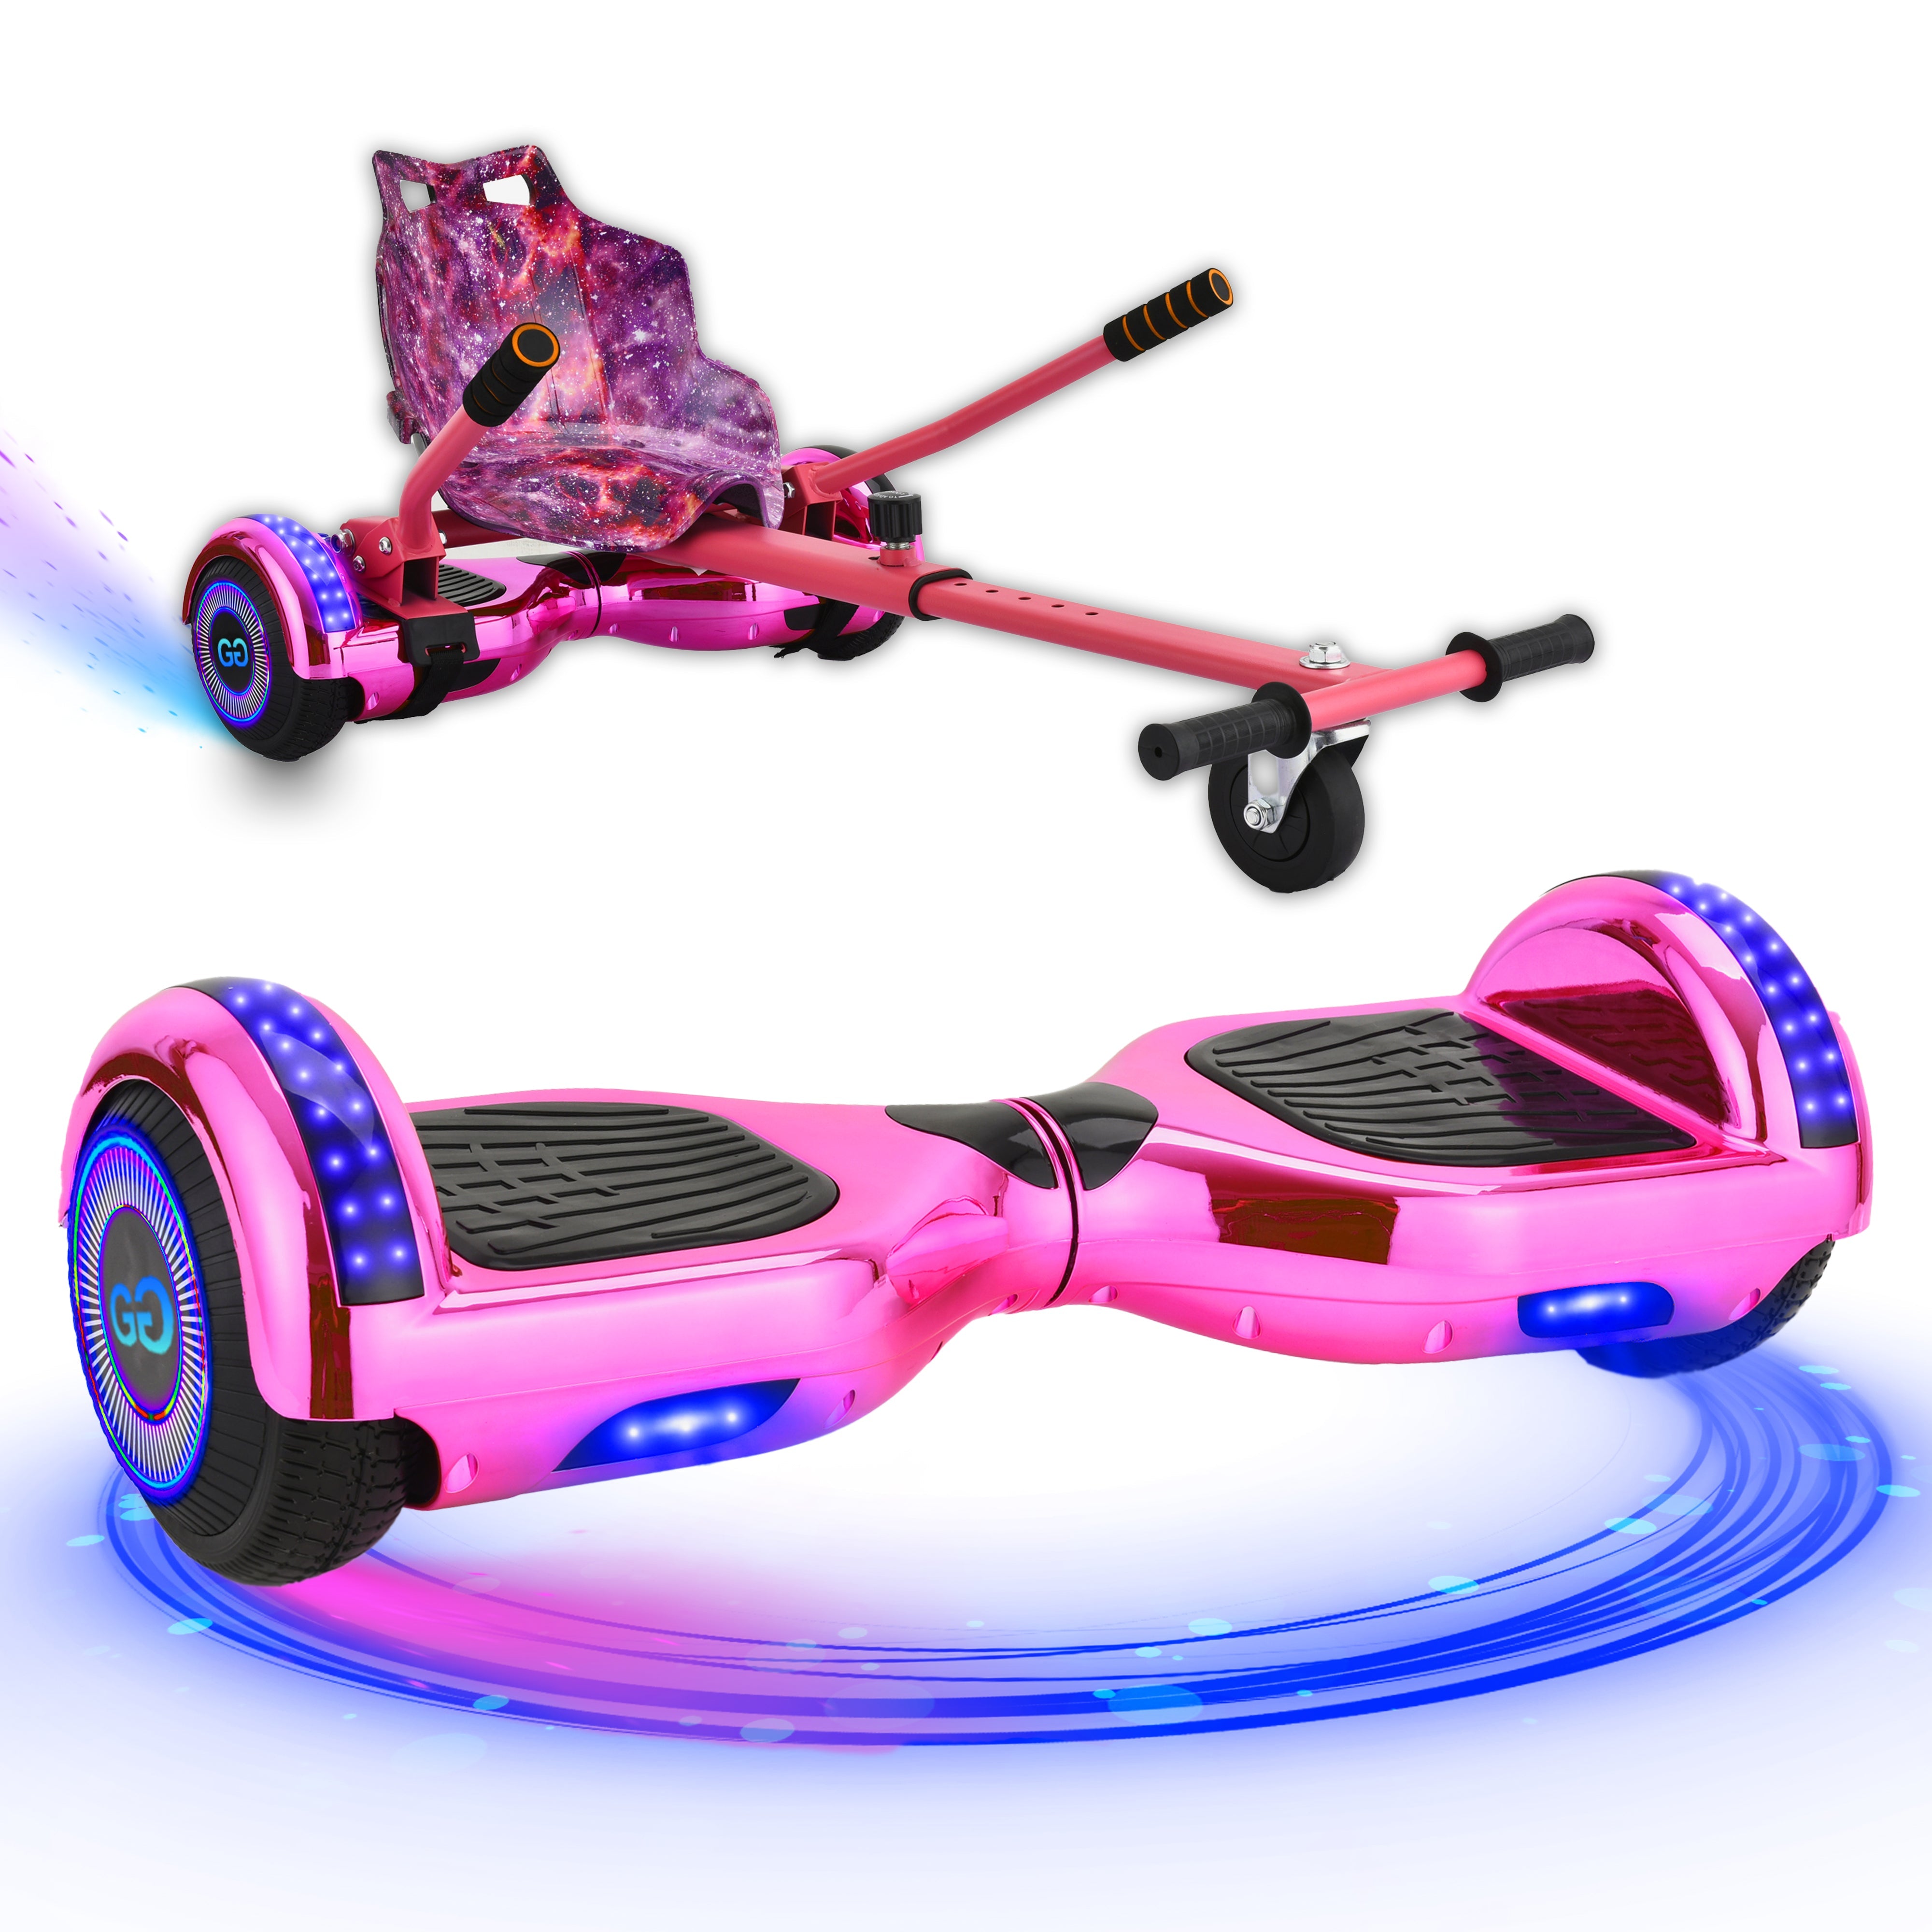 Go anywhere! Hoverboard with easy-attach go-kart kit 